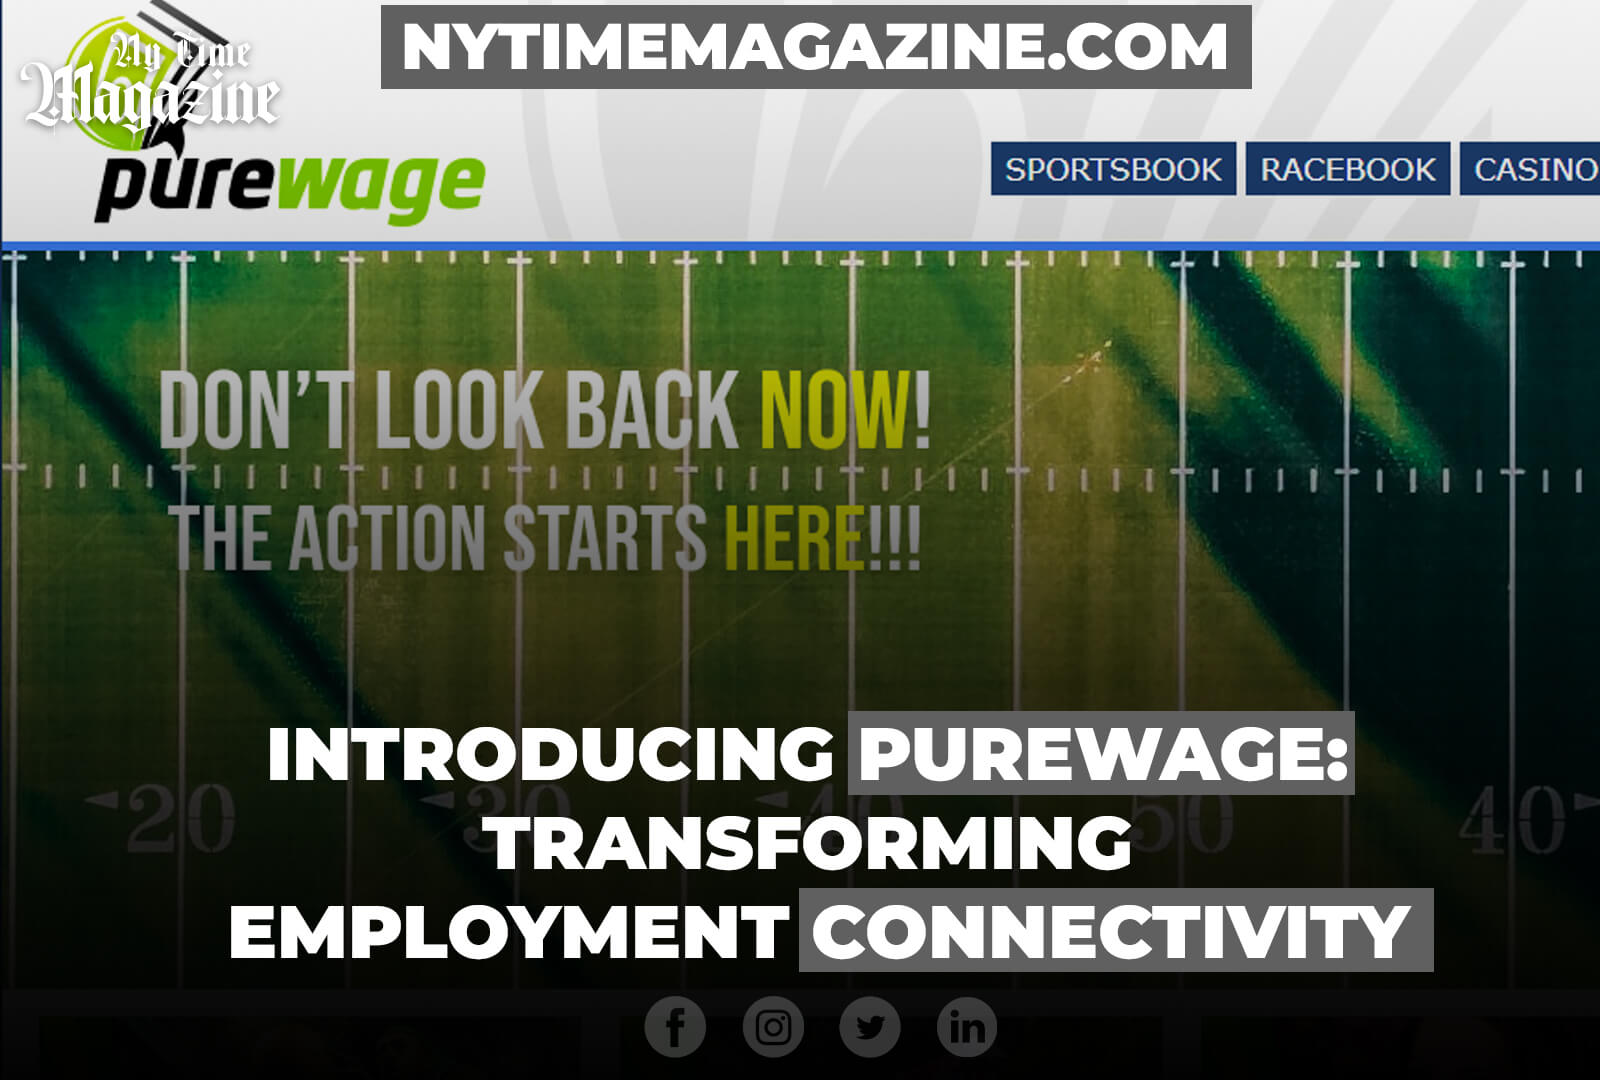 INTRODUCING PUREWAGE: TRANSFORMING EMPLOYMENT CONNECTIVITY